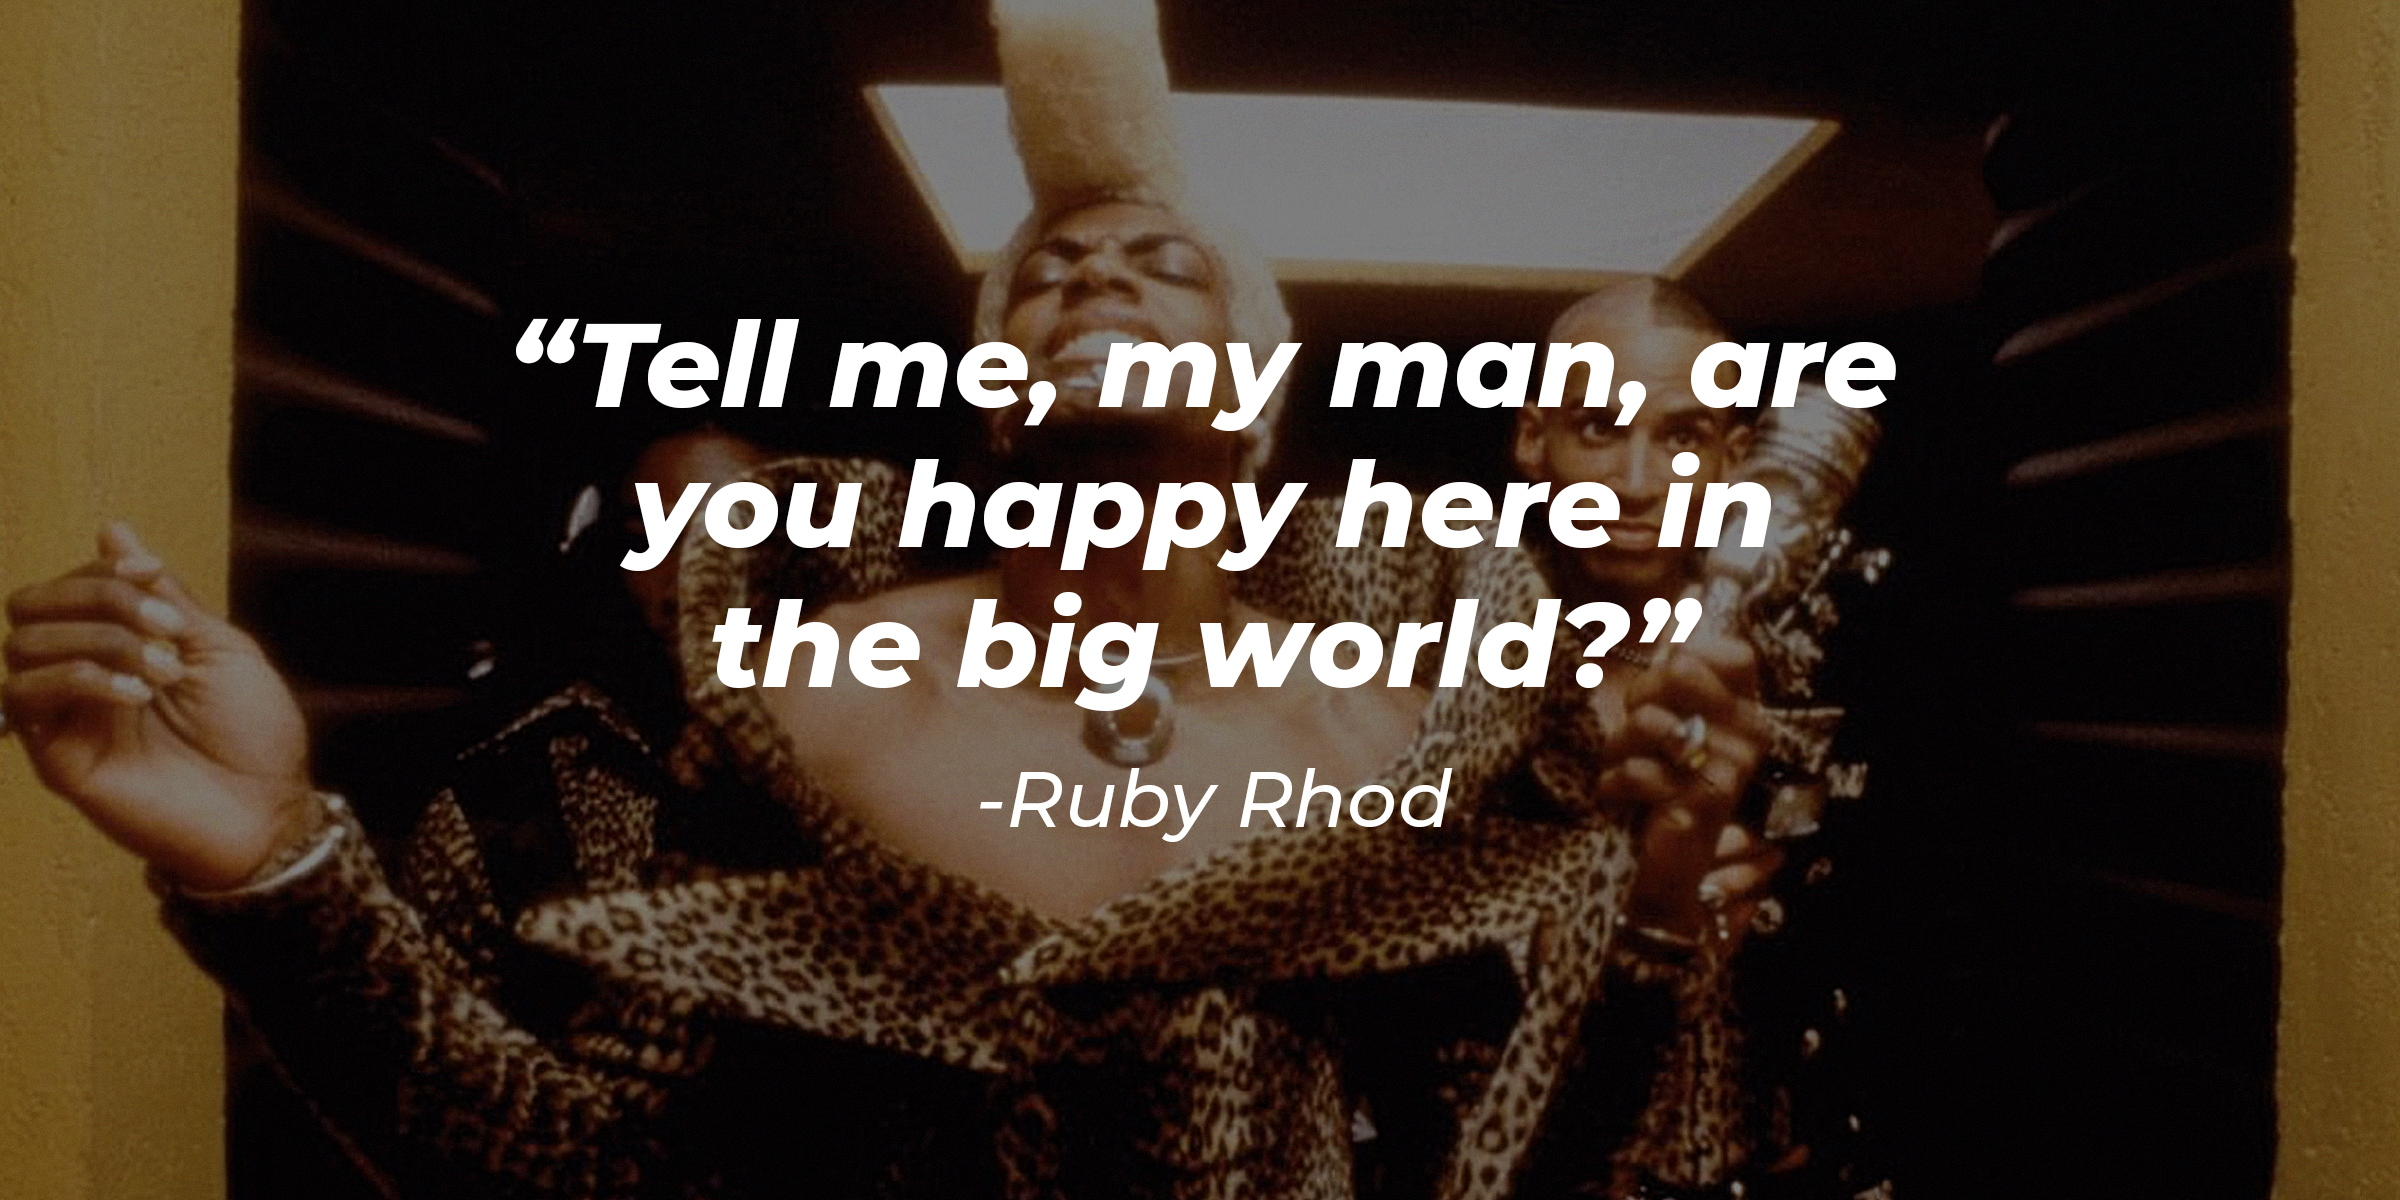 A Photo of Ruby Rhod with the Quote, “Tell Me, My Man, Are You Happy Here in the Big World?” | Source: Facebook/TheFifthElementMovie